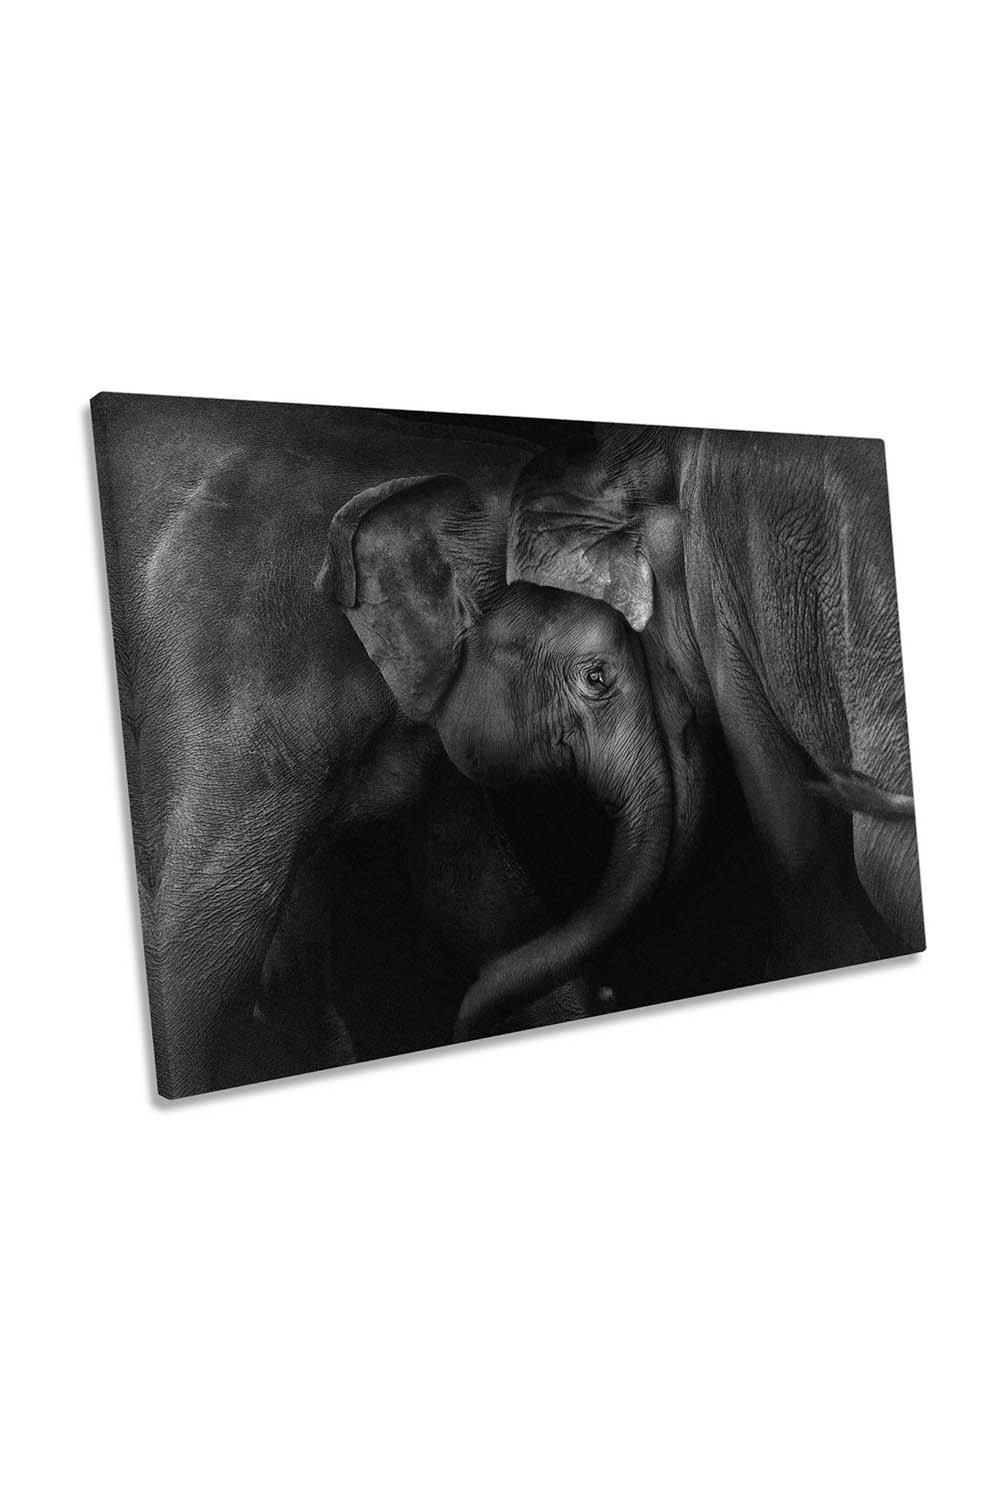 Elephants Family Wildlife Canvas Wall Art Picture Print